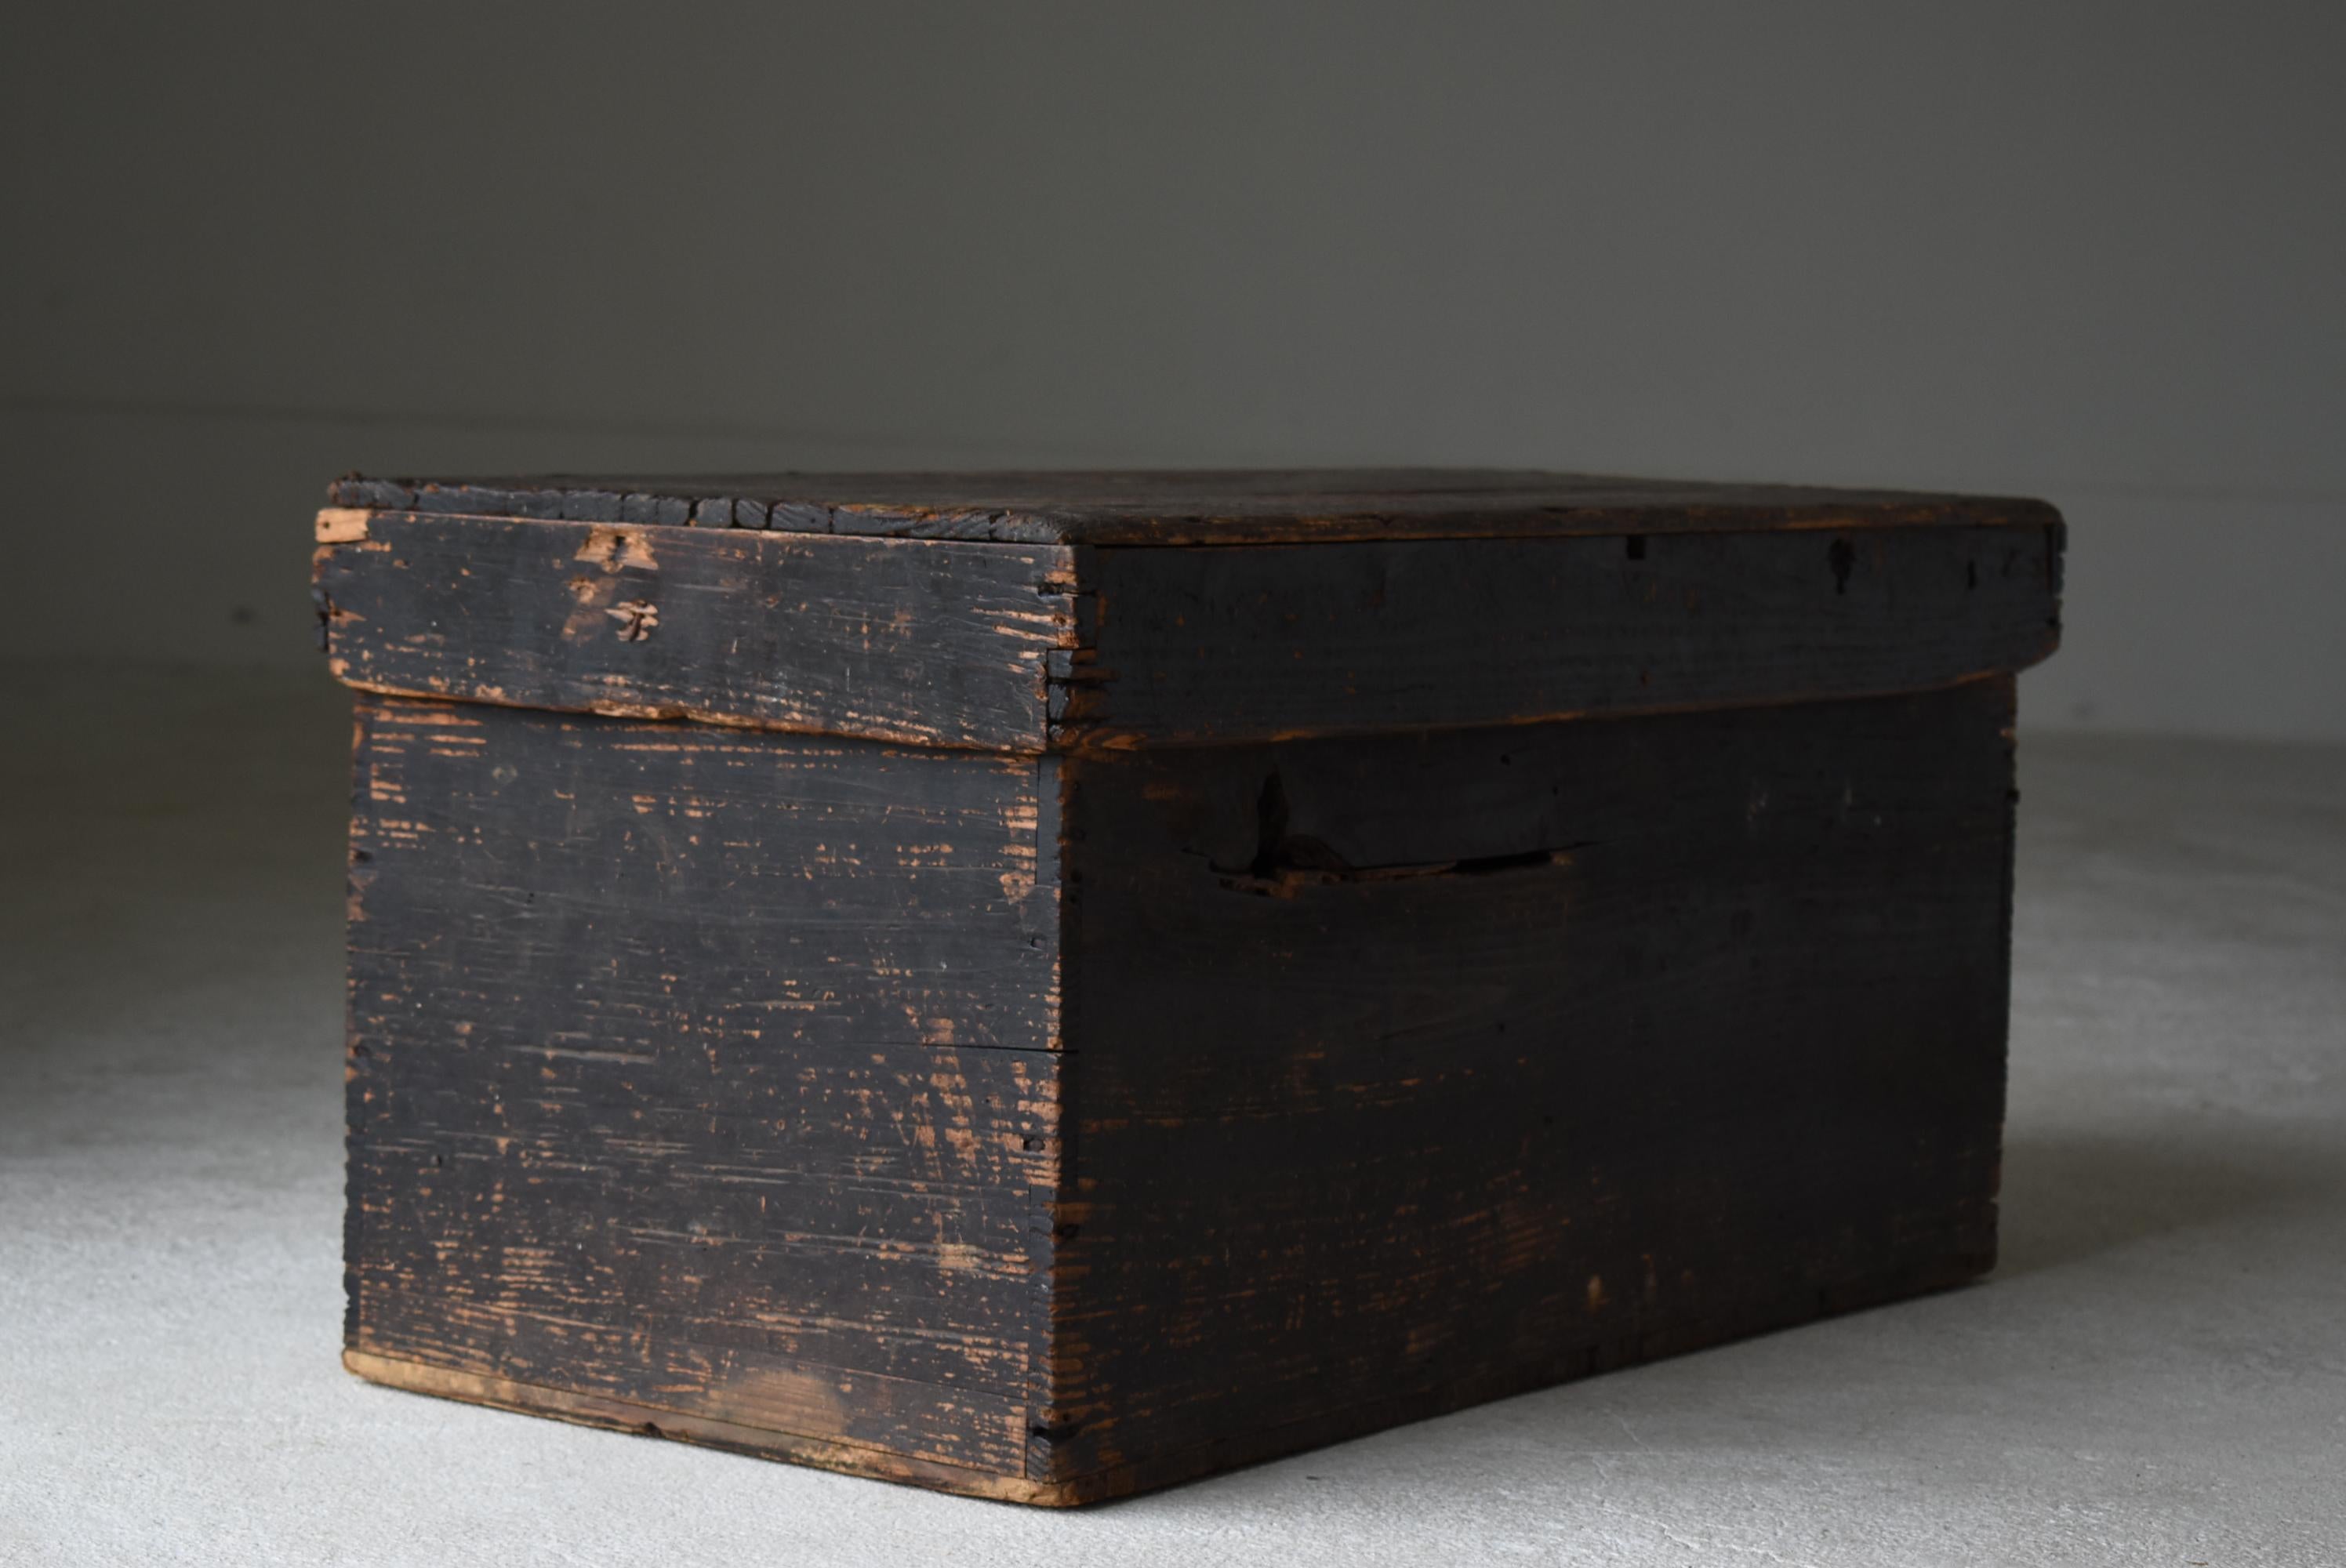 19th Century Japanese Old Wooden Box 1860-1900 / Antique Storage Sofa Table Coffee Table Side